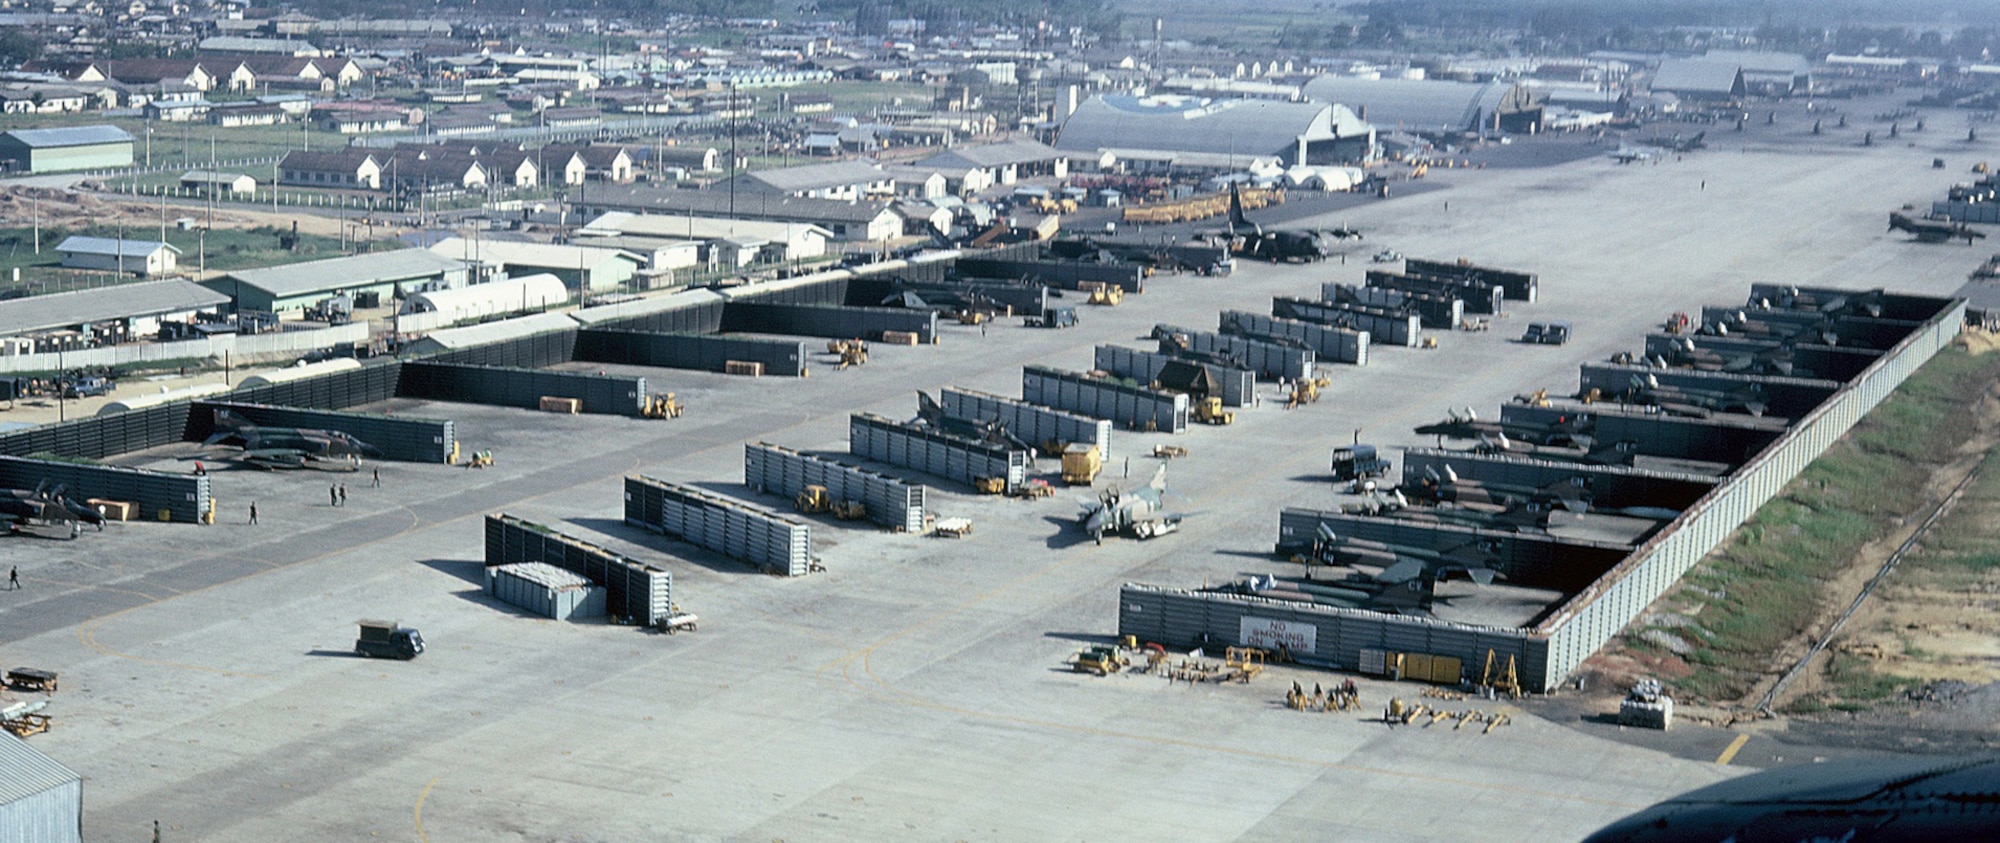 Several members of the OreANG, including Richard Stearns, Scott Powell and Tom Tutt, served at Da Nang Air Base, South Vietnam, during the war.  This picture of the Da Nang ramp shows F-4 Phantoms of the 366th TFW, the “Gunfighters.”  Revetments, like these at Da Nang AB, provided some protection against mortar and rocket attacks. (U.S. Air Force photo)